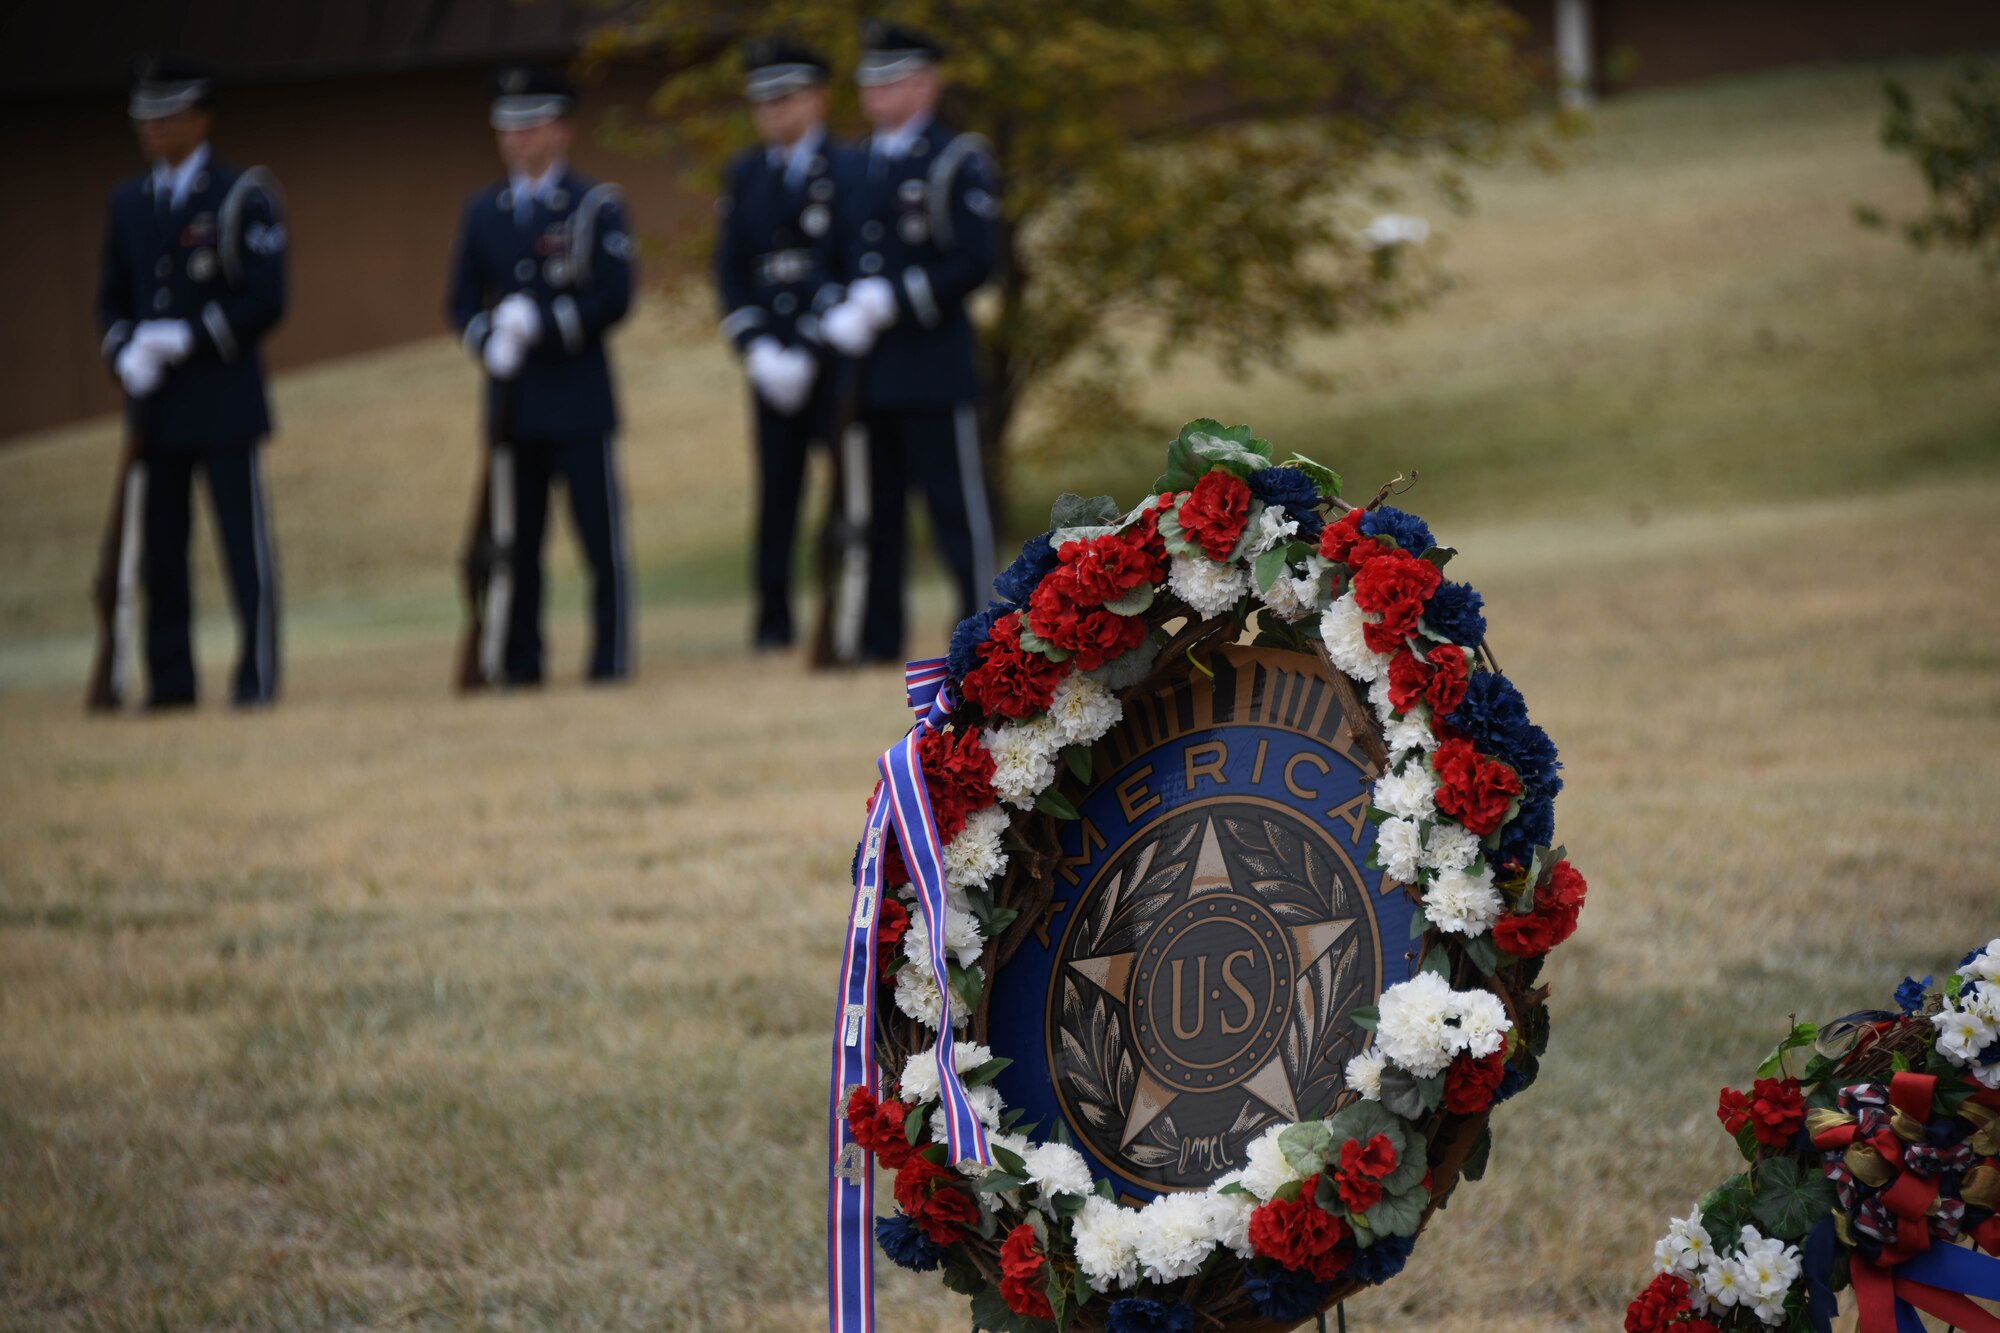 An American Legion wreath is placed at the Jackson County War Memorial in Altus, Oklahoma, Nov. 11, 2023. The wreath is a symbol representing victory, bravery, and peace and is laid to pay tribute to veterans. (U.S. Air Force photo by Senior Airman Miyah Gray)